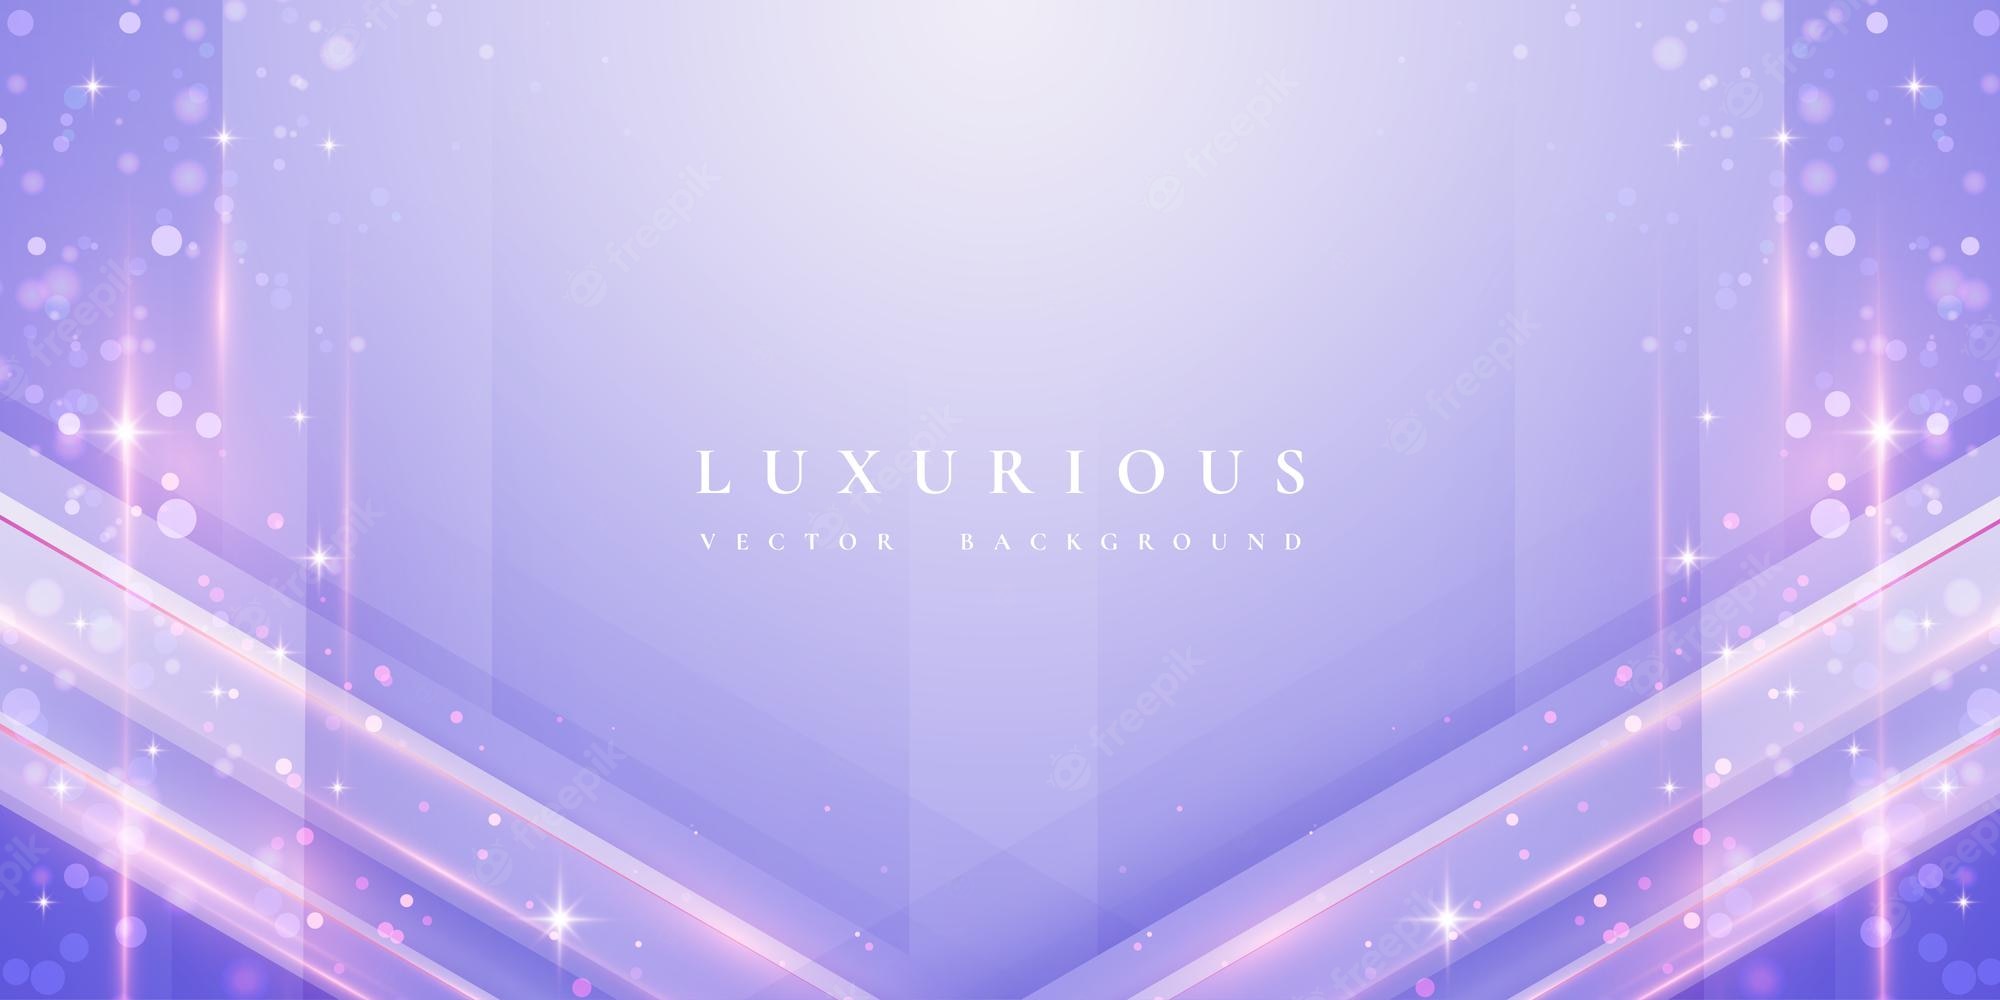 Premium Vector Luxurious Modern Purple Background With Shiny